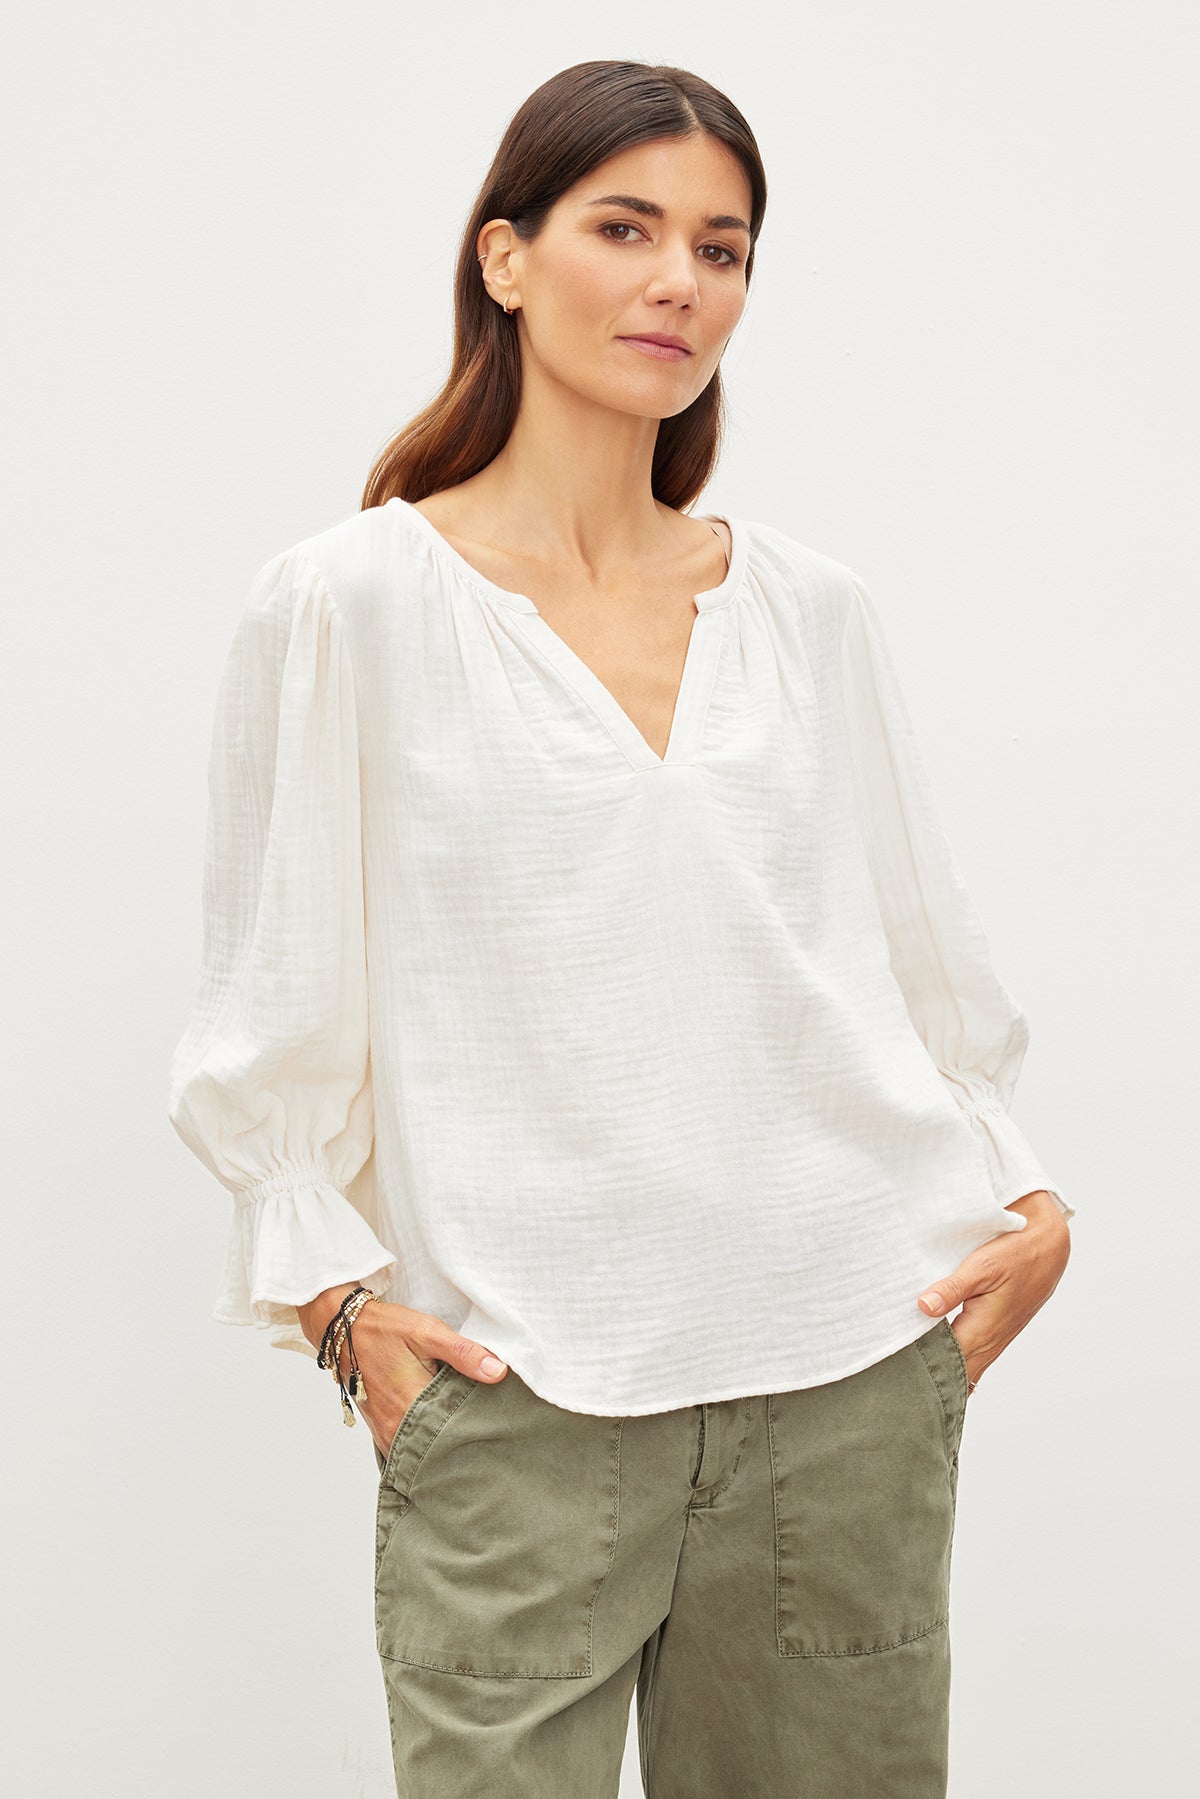 The model is wearing a relaxed fit MILLY COTTON GAUZE PEASANT TOP blouse and green pants made from cotton gauze, achieving effortless sophistication. Brand: Velvet by Graham & Spencer-35967572803777